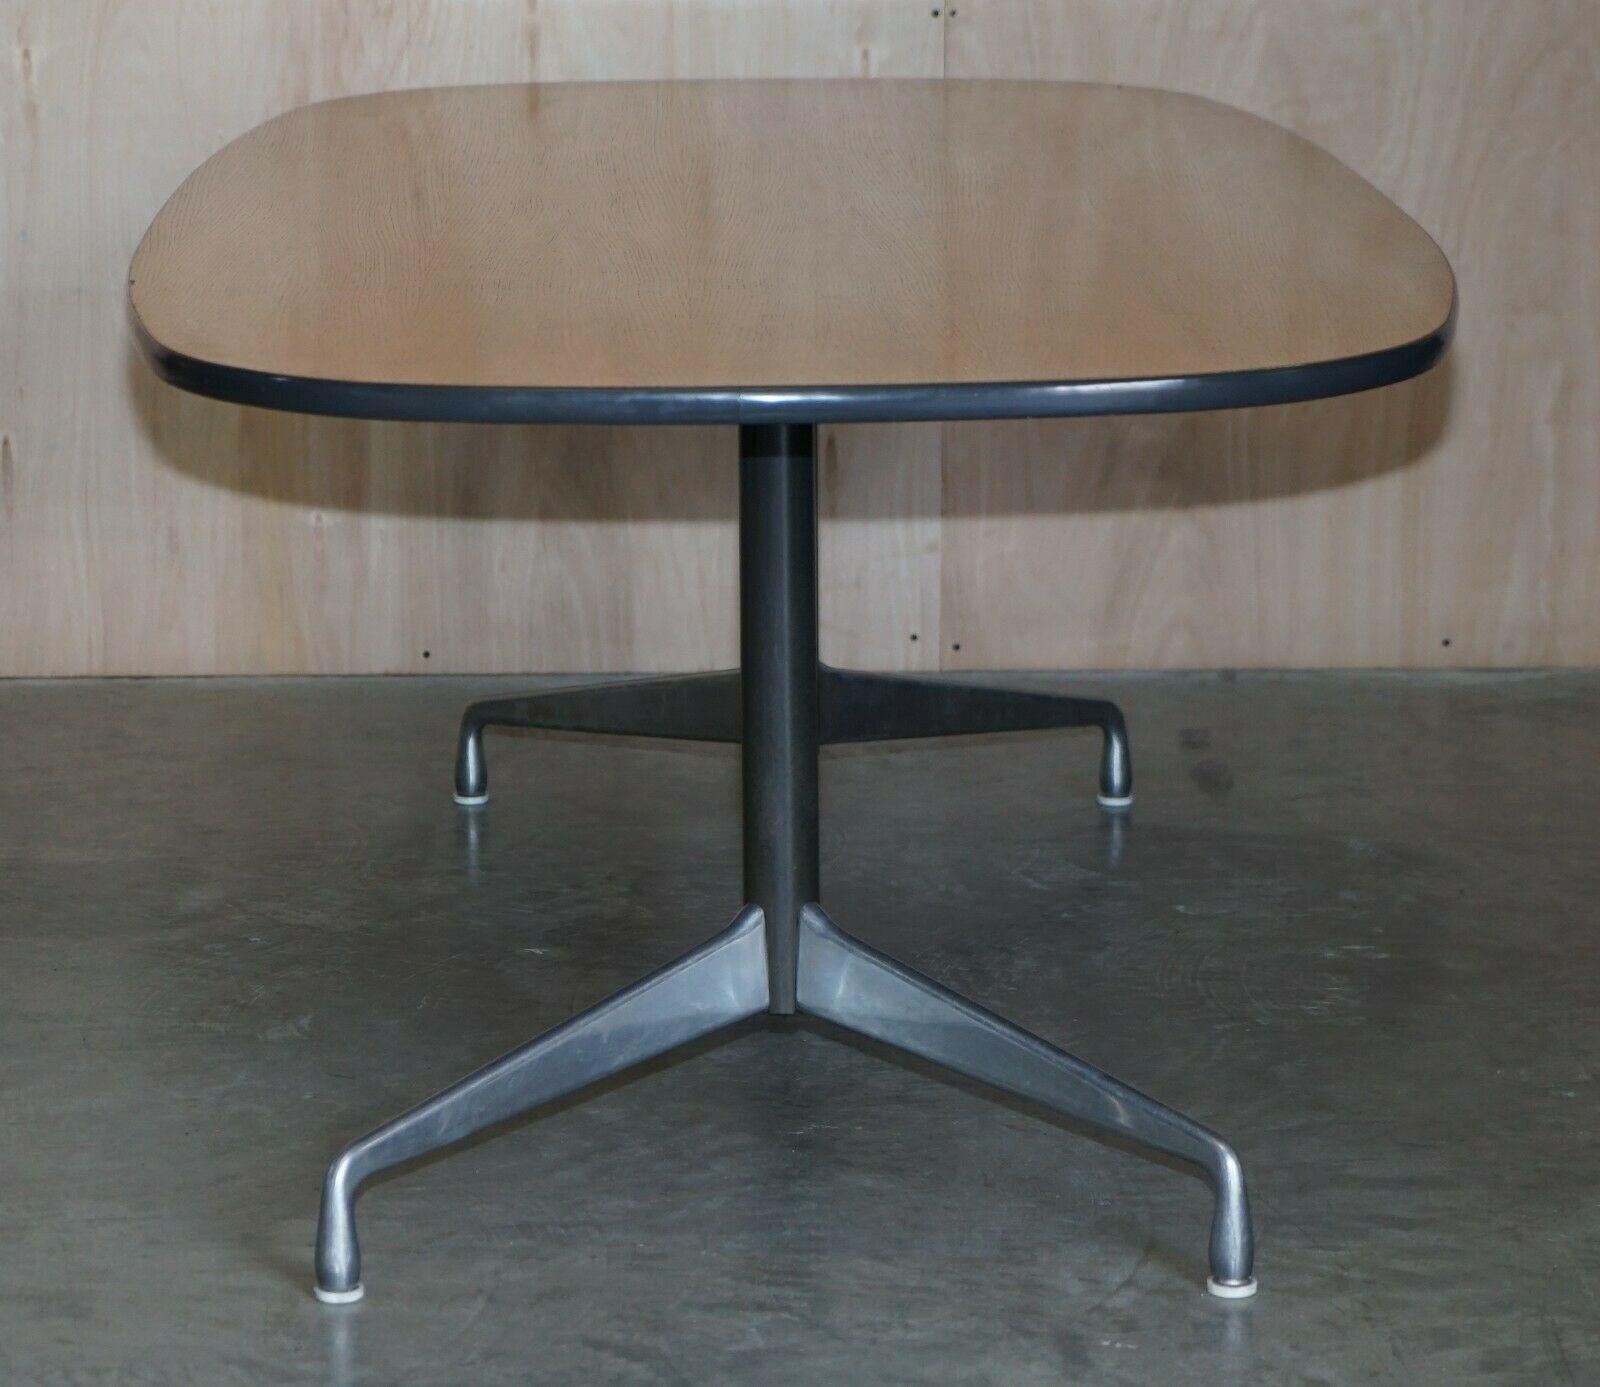 We are delighted to offer this super rare and highly collectable, original, Mid Century Modern, Herman Miller No1 Edition conference table, which were purchased by the original owner from Herman Miller directly at the beginning of the 1980’s.

The